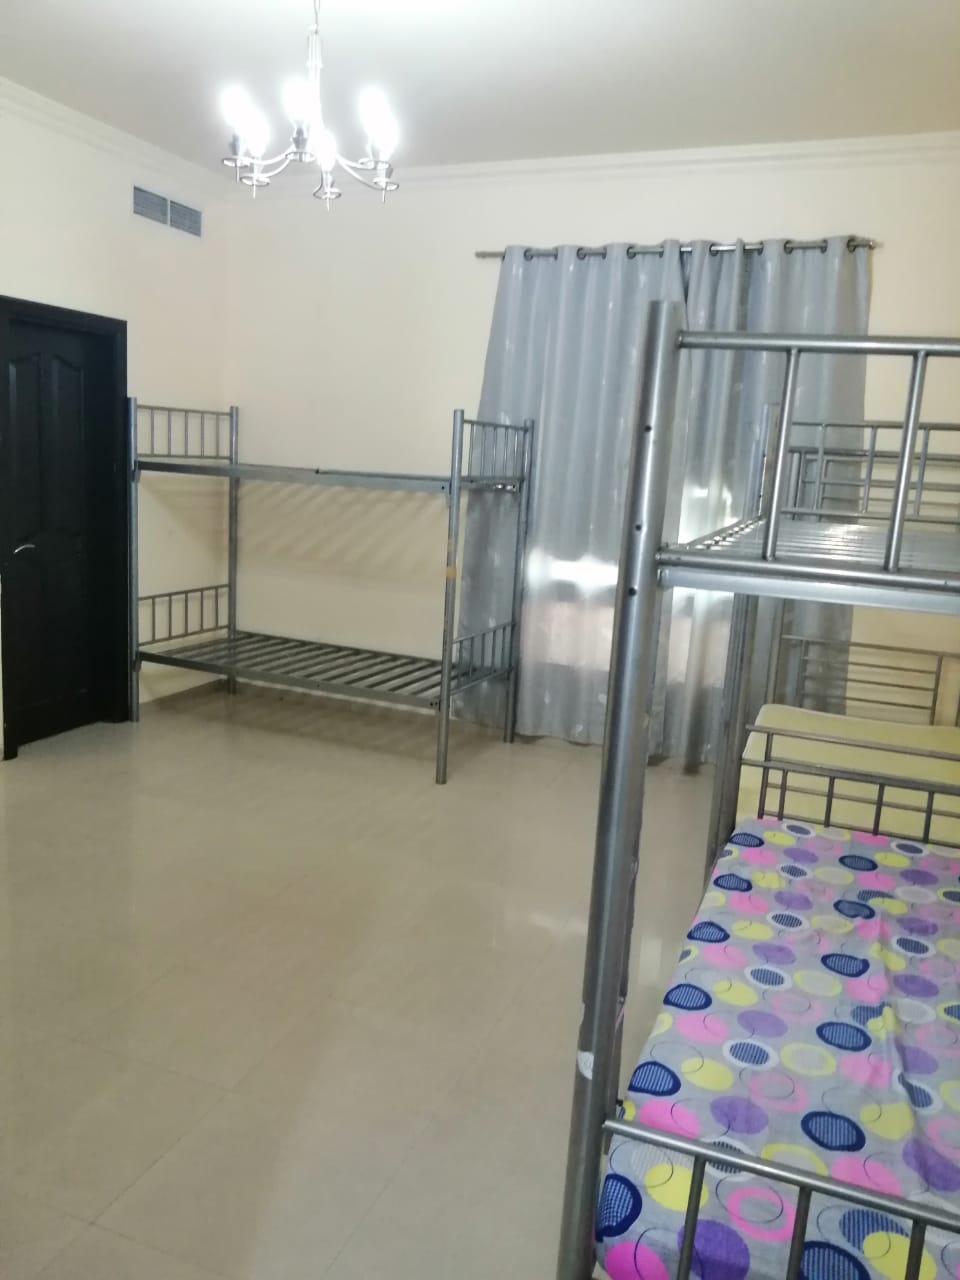 Bed Spaces for Males @700 to @800 Inclusive All Gas, C/Ac, Very Close to Burjuman Metro Station Bur Dubai